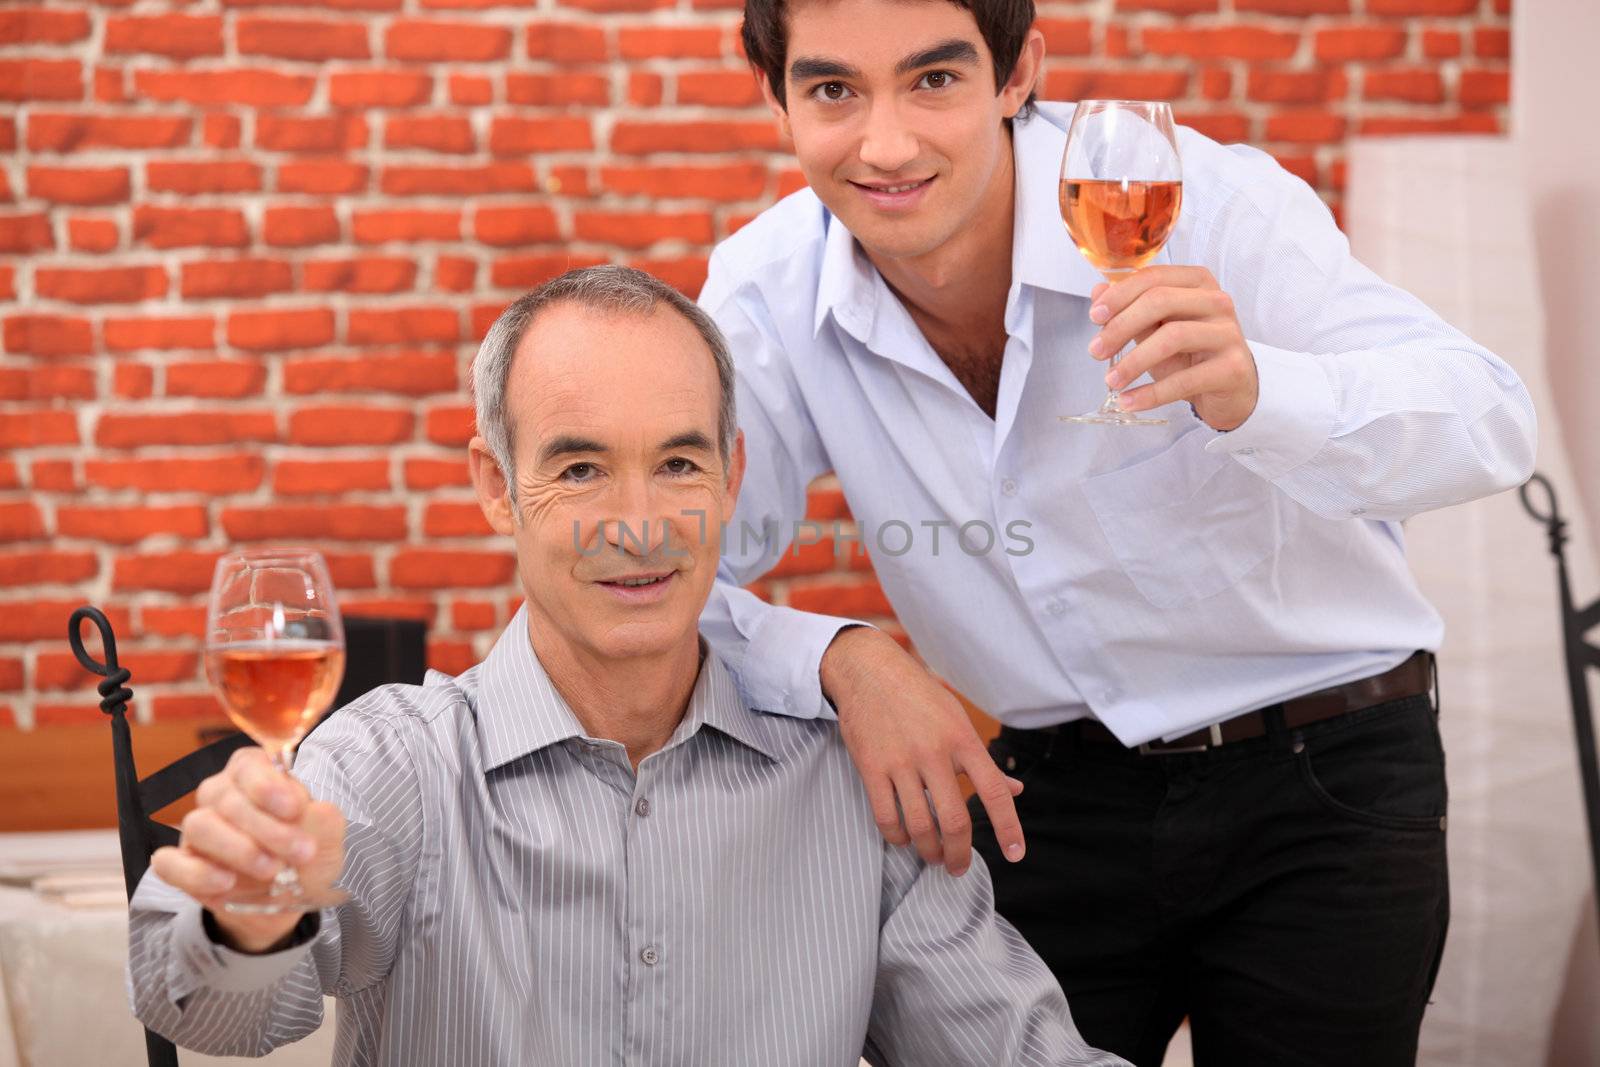 Men raising their glasses in a toast by phovoir